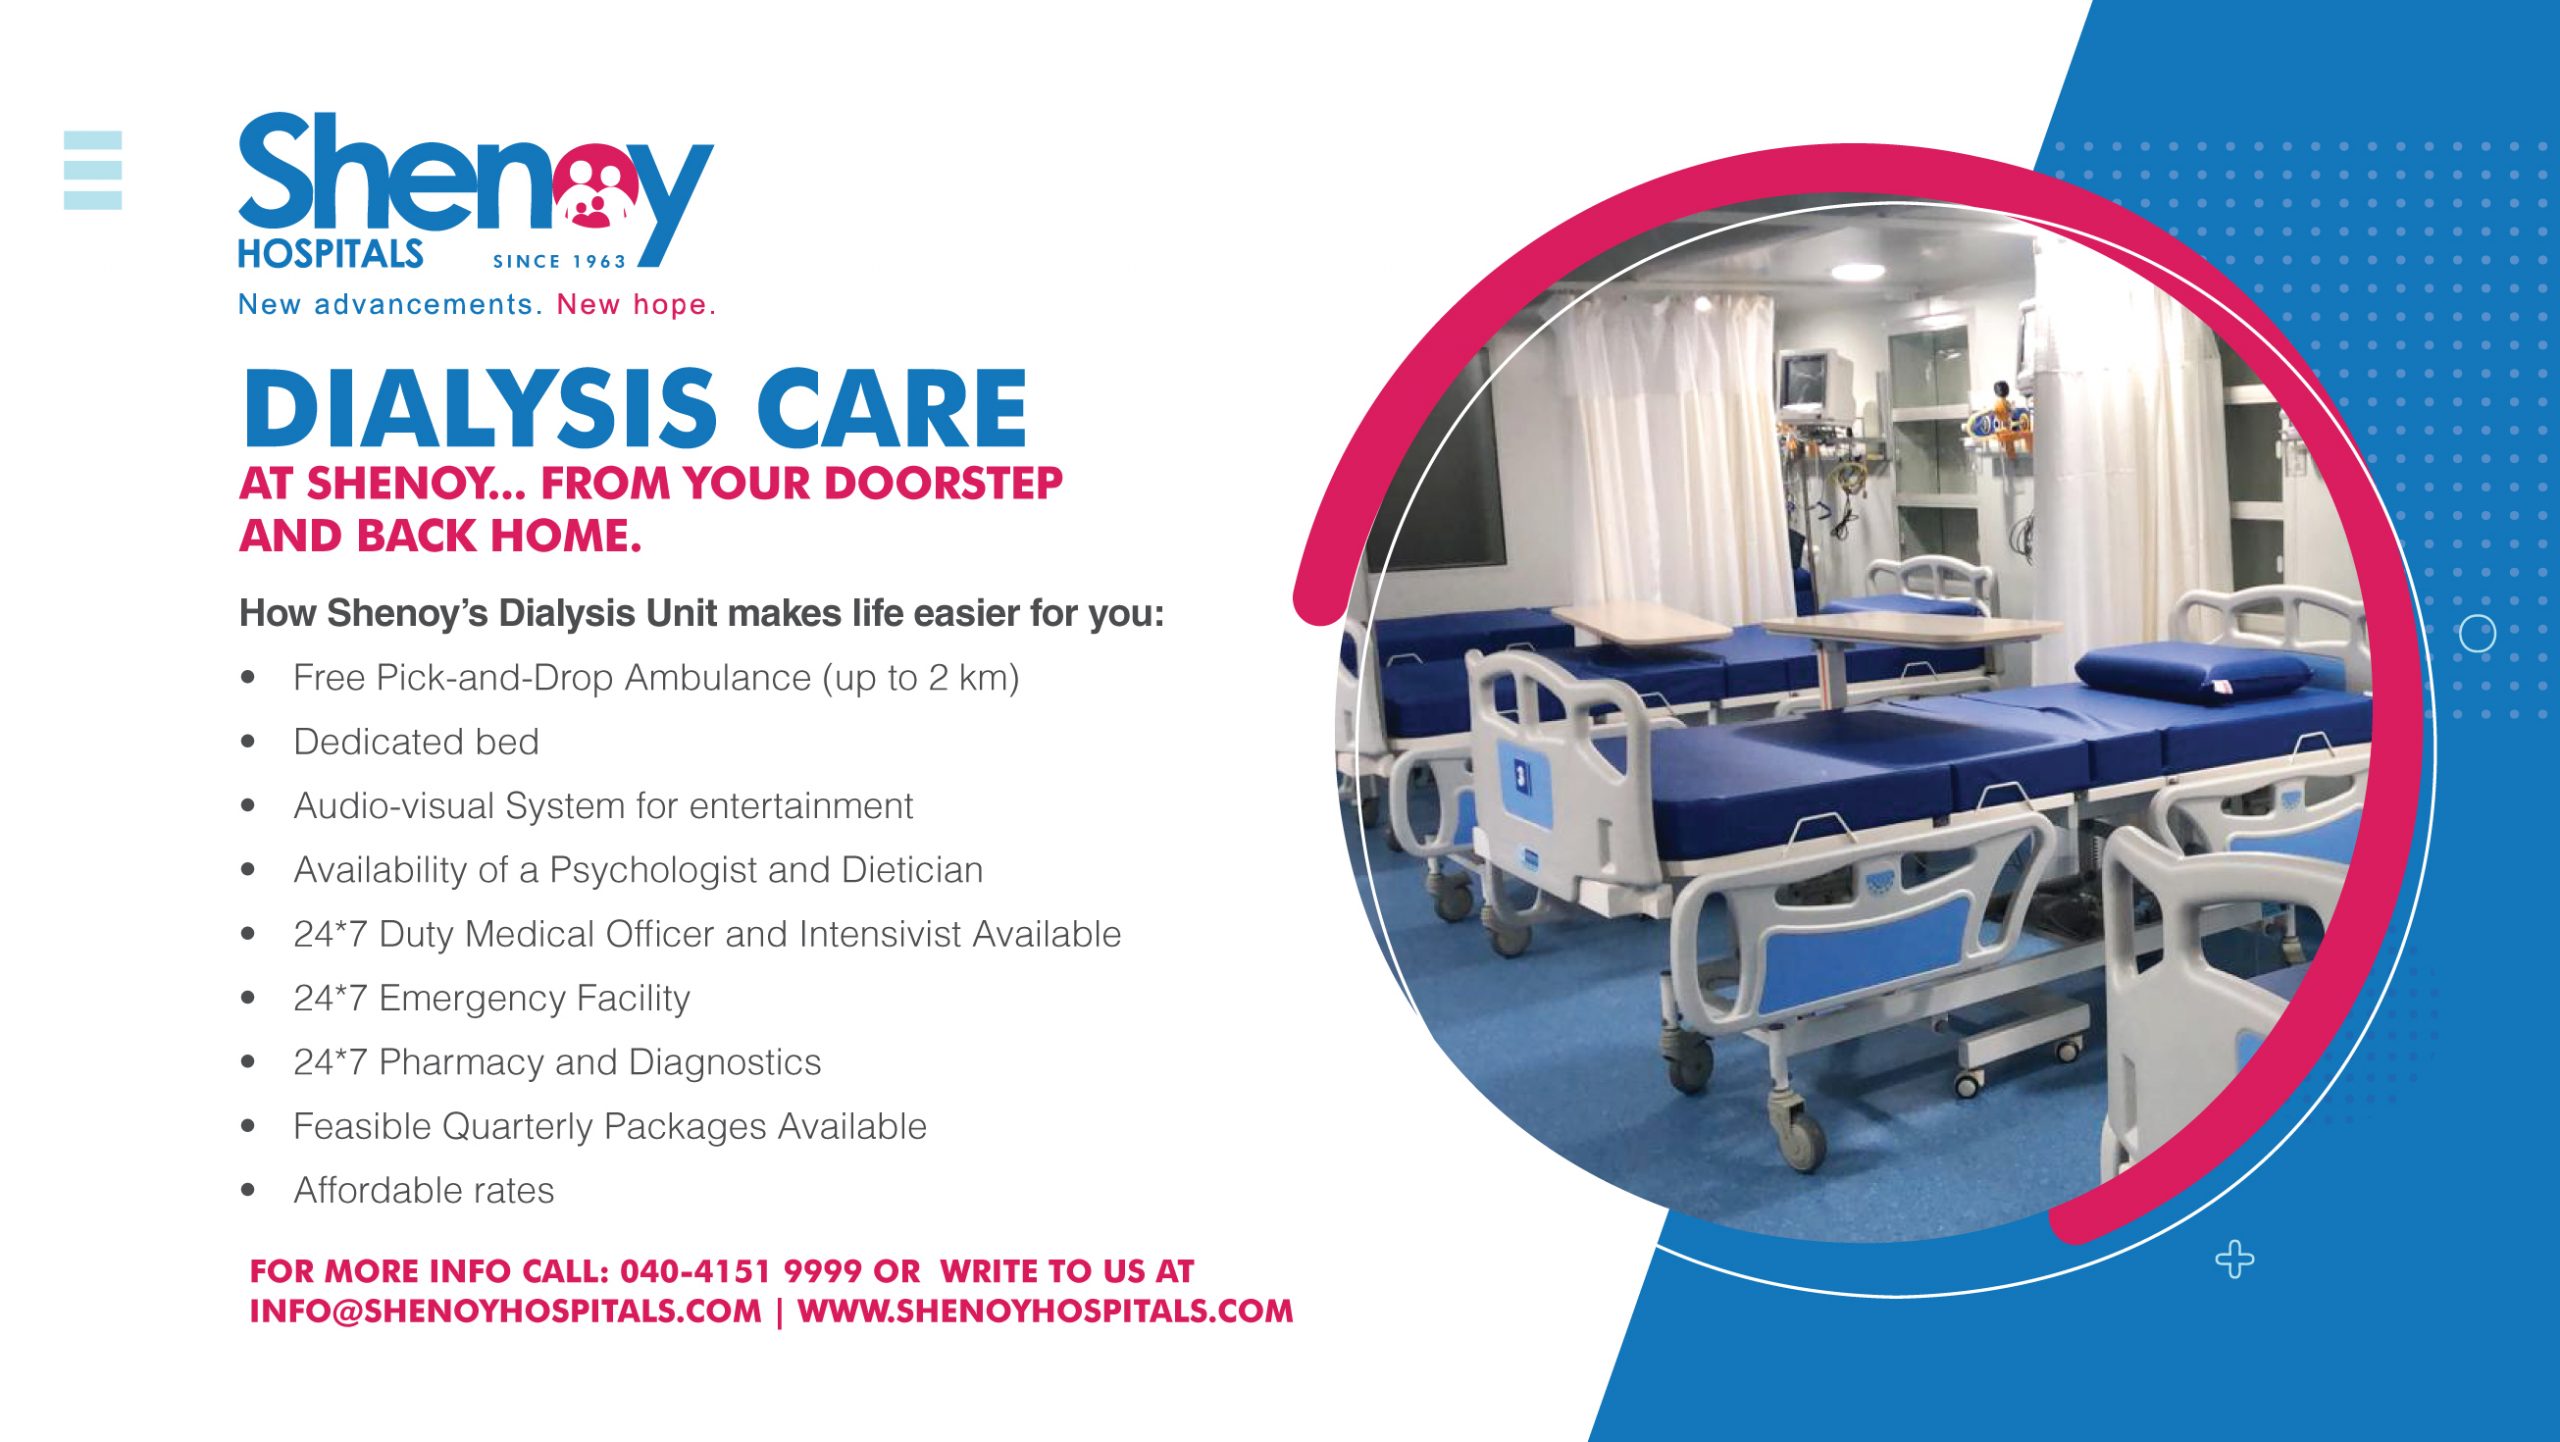 A glimpse into everything about Dialysis